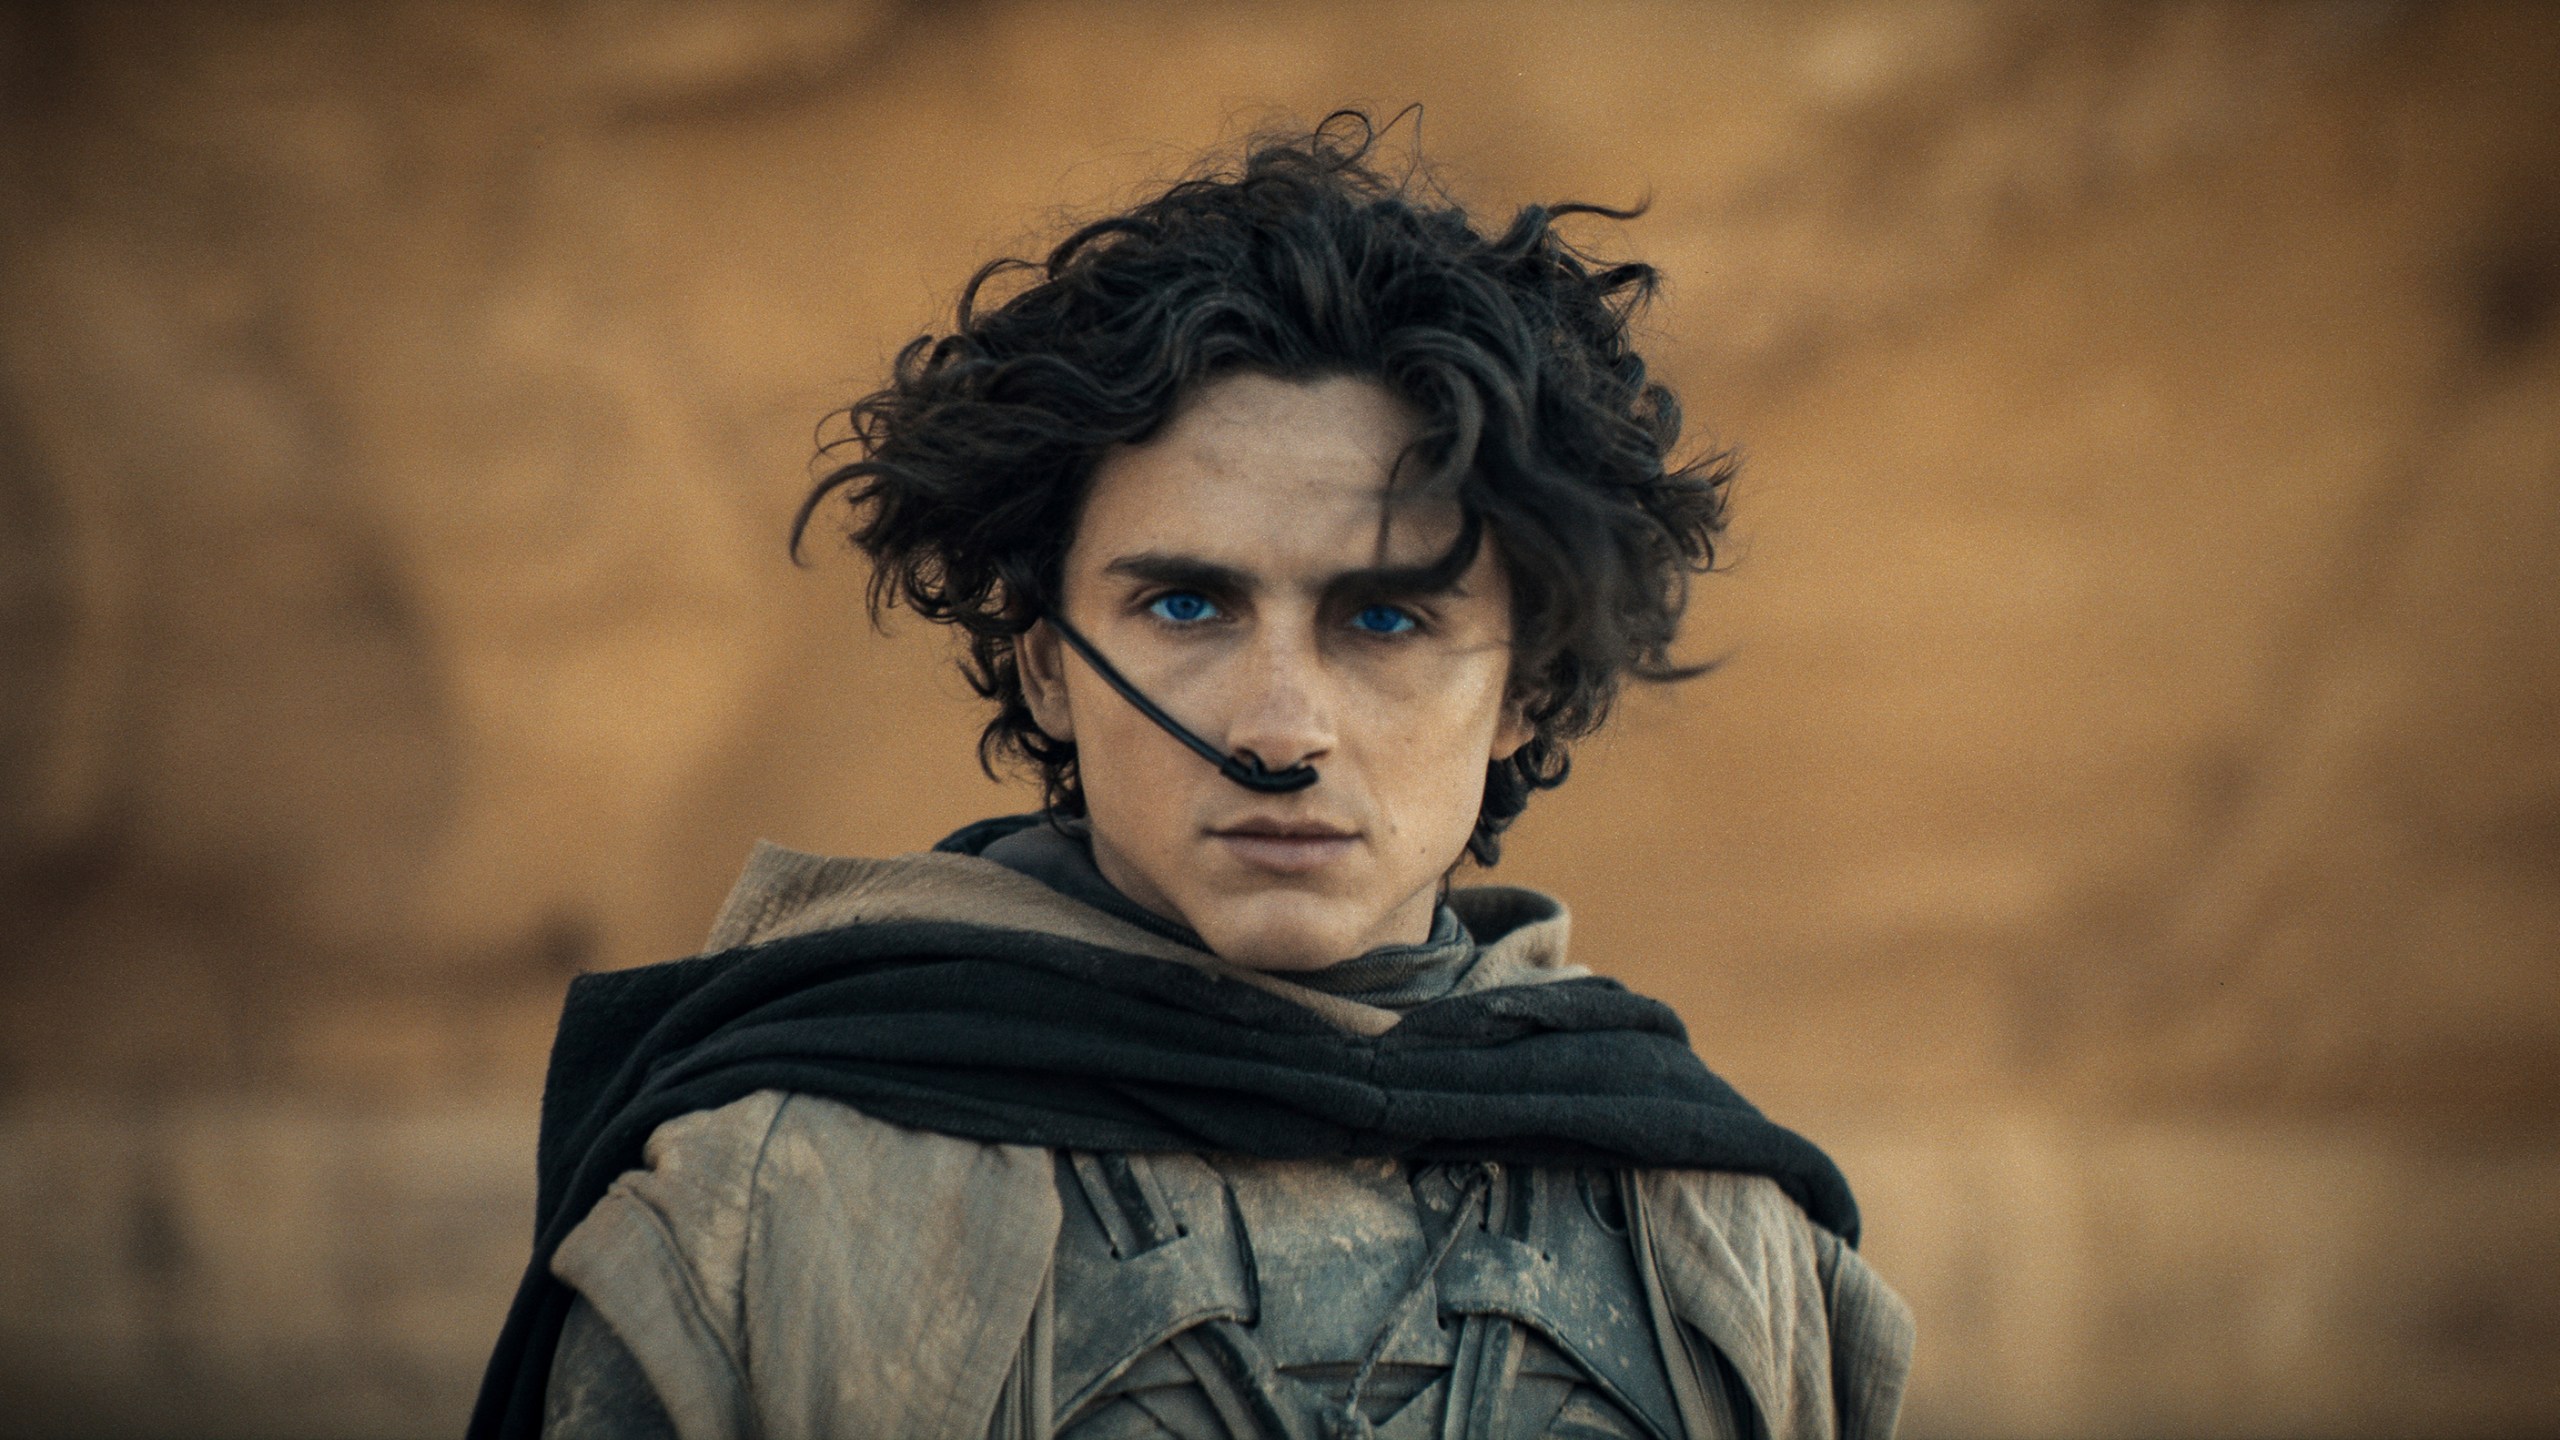 A picture of Timothee Chalamet in the film version of "Dune."